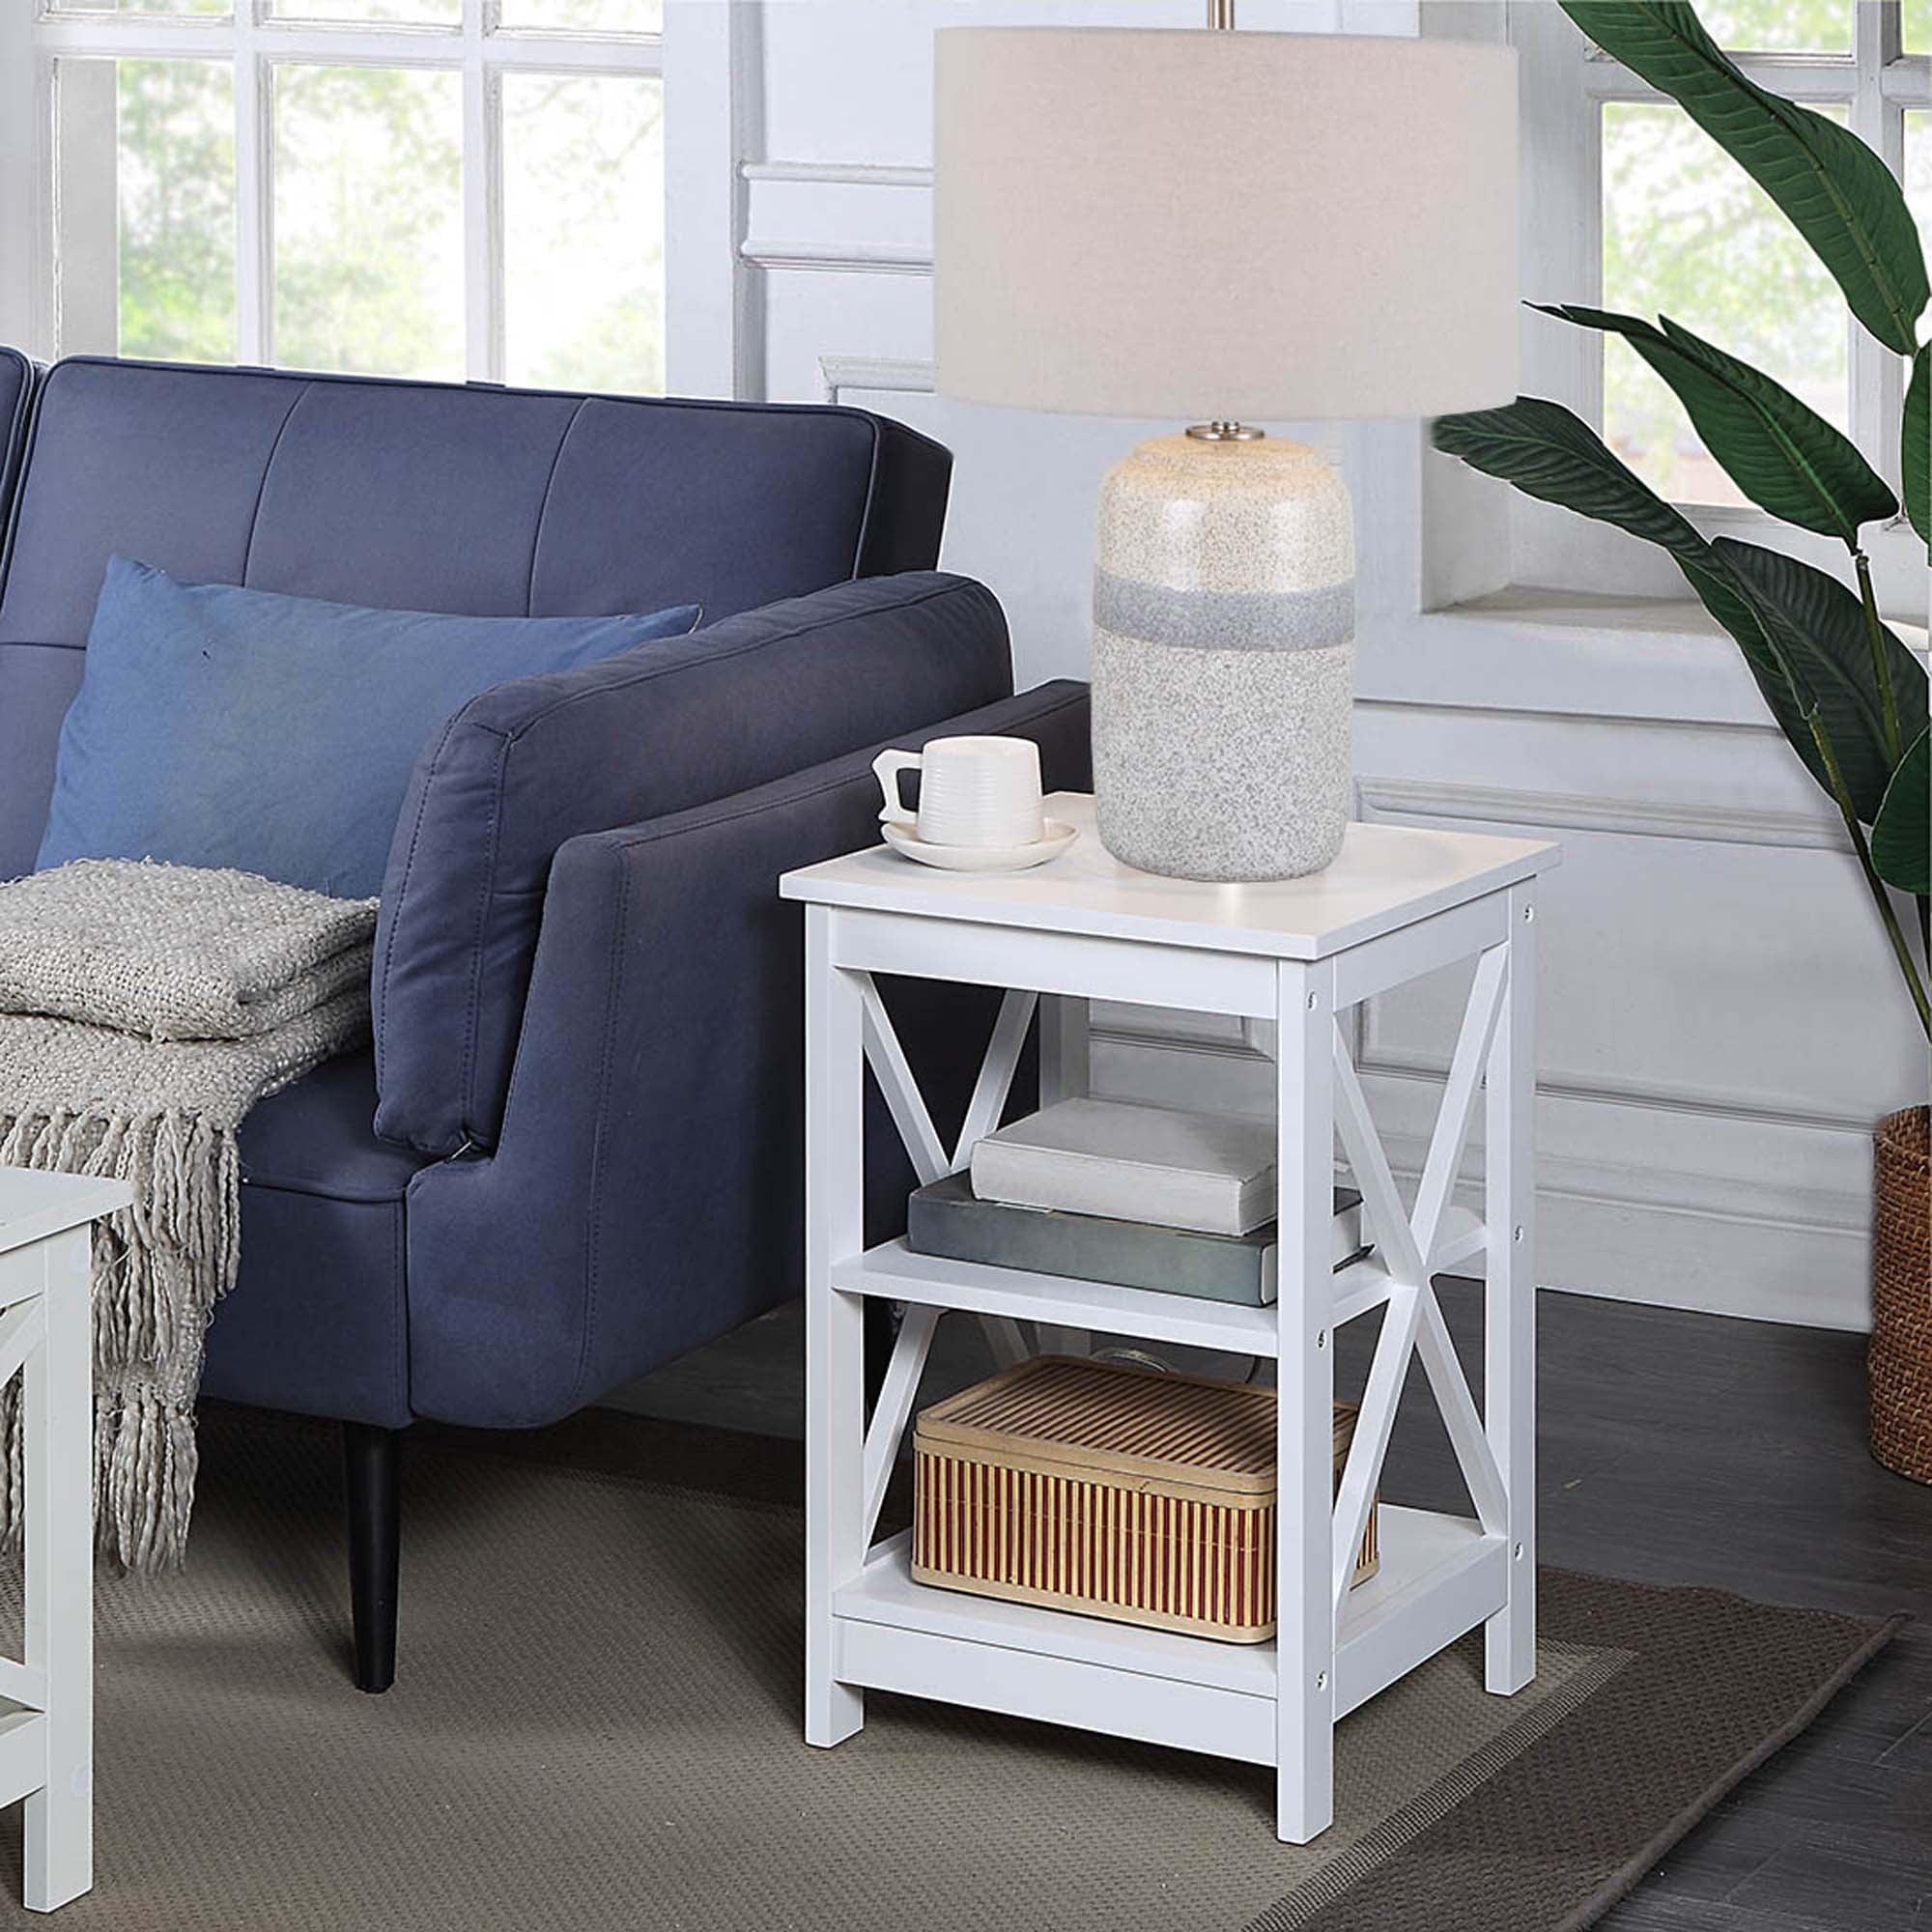 Coastal Farmhouse Chic White Square Wood End Table with Shelves